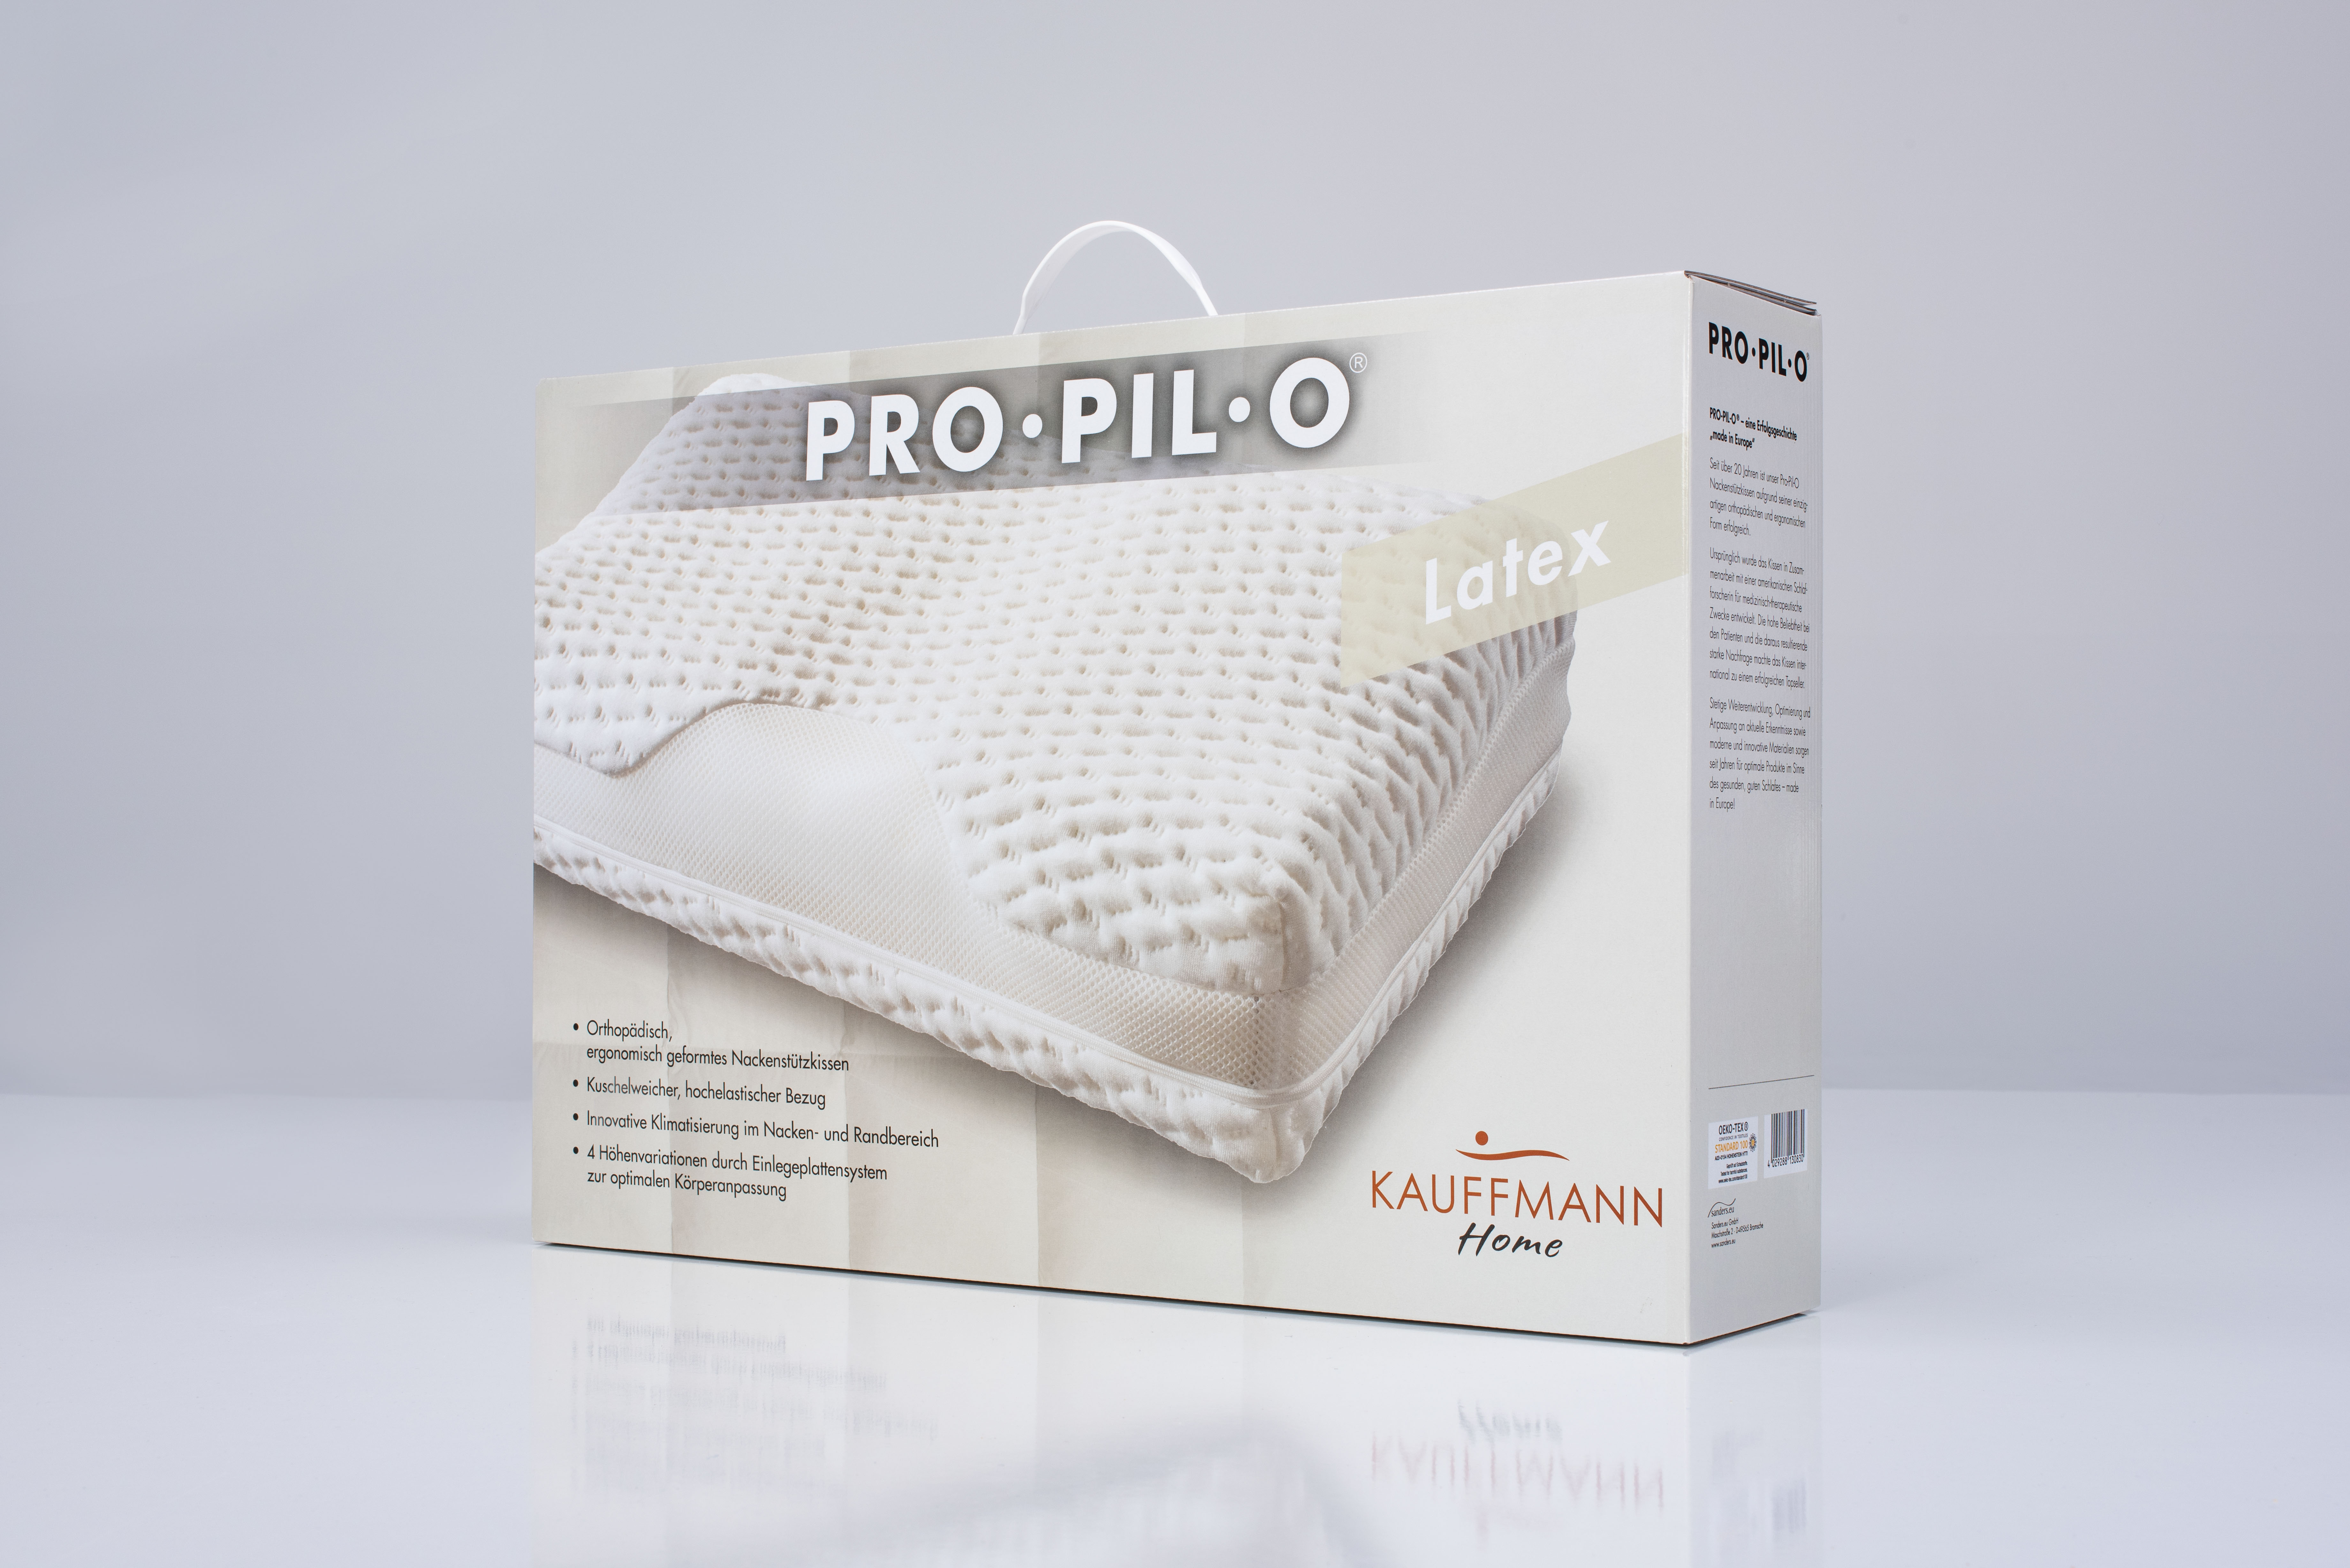 PRO-PIL-O Latex Neck Support Pillow